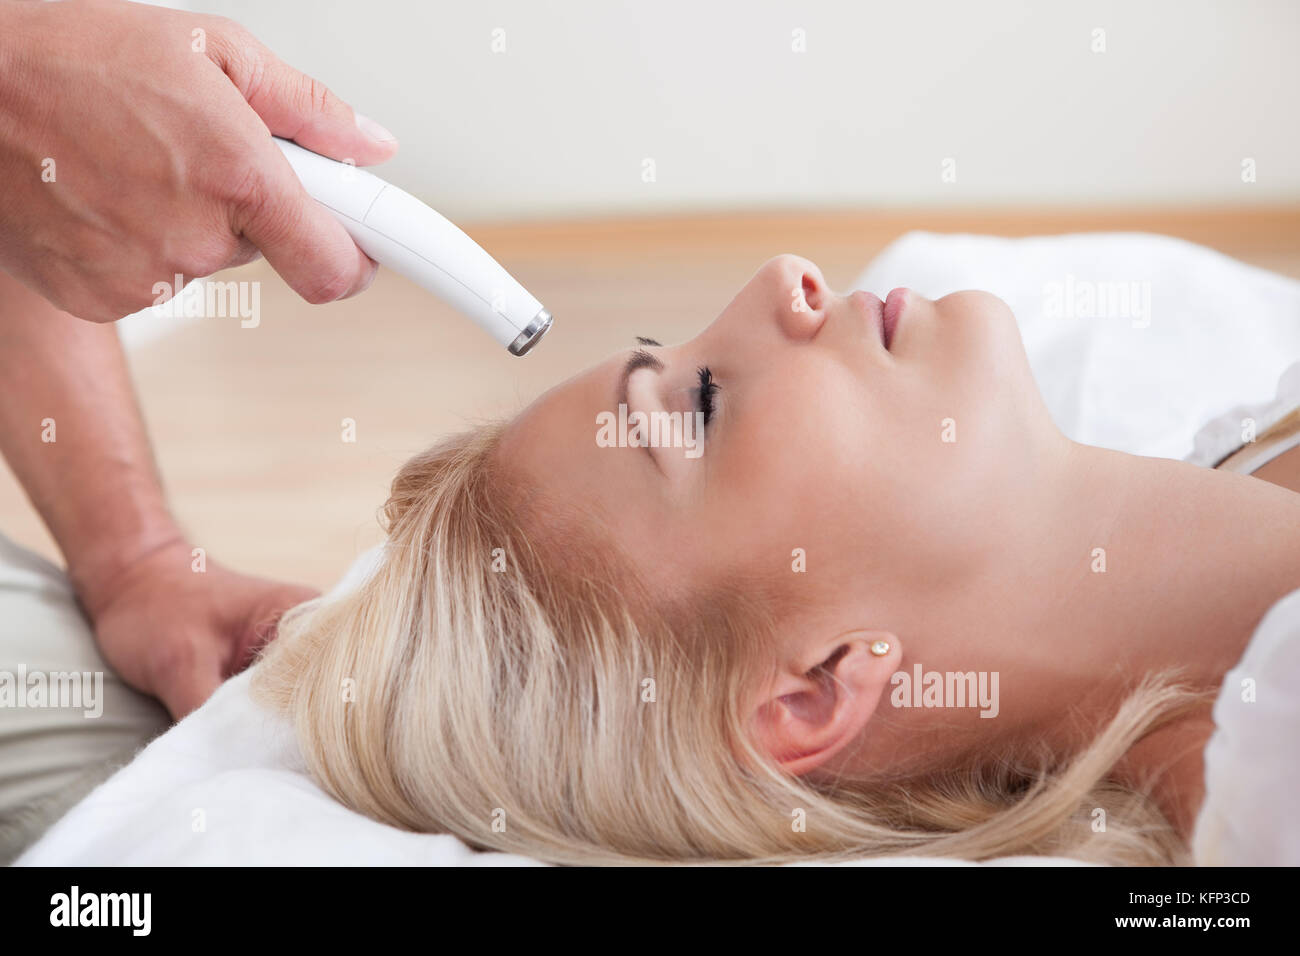 Profile View Of Happy Young Woman During Cosmetic Treatment, Indoors Stock Photo